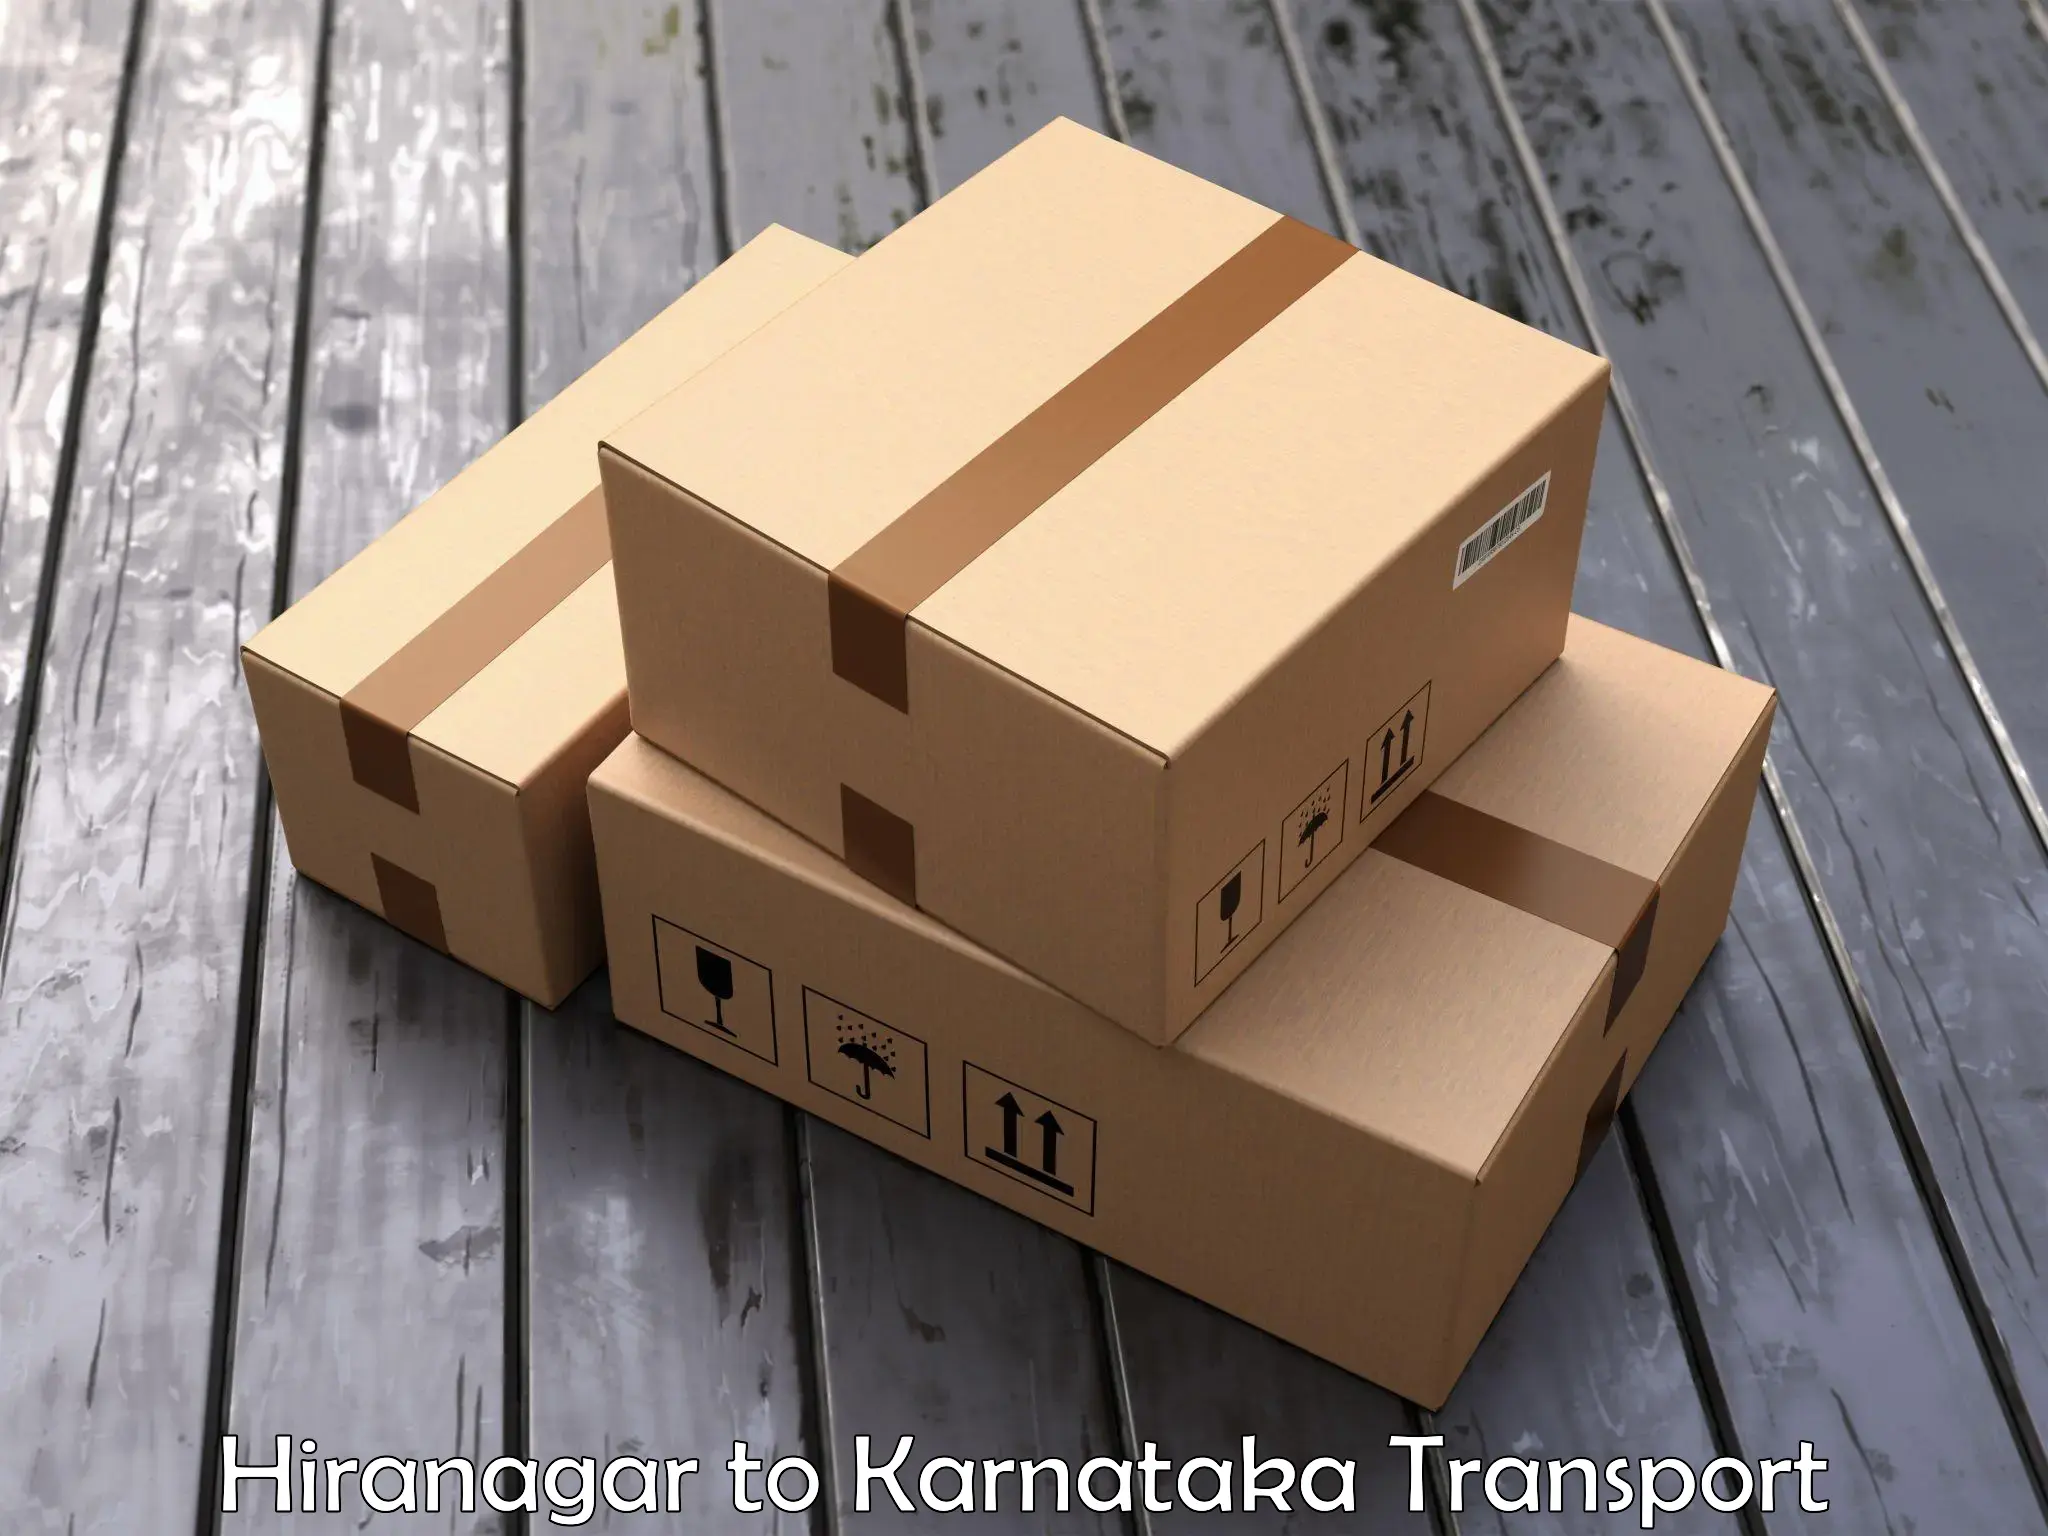 Container transportation services in Hiranagar to Manipal Academy of Higher Education